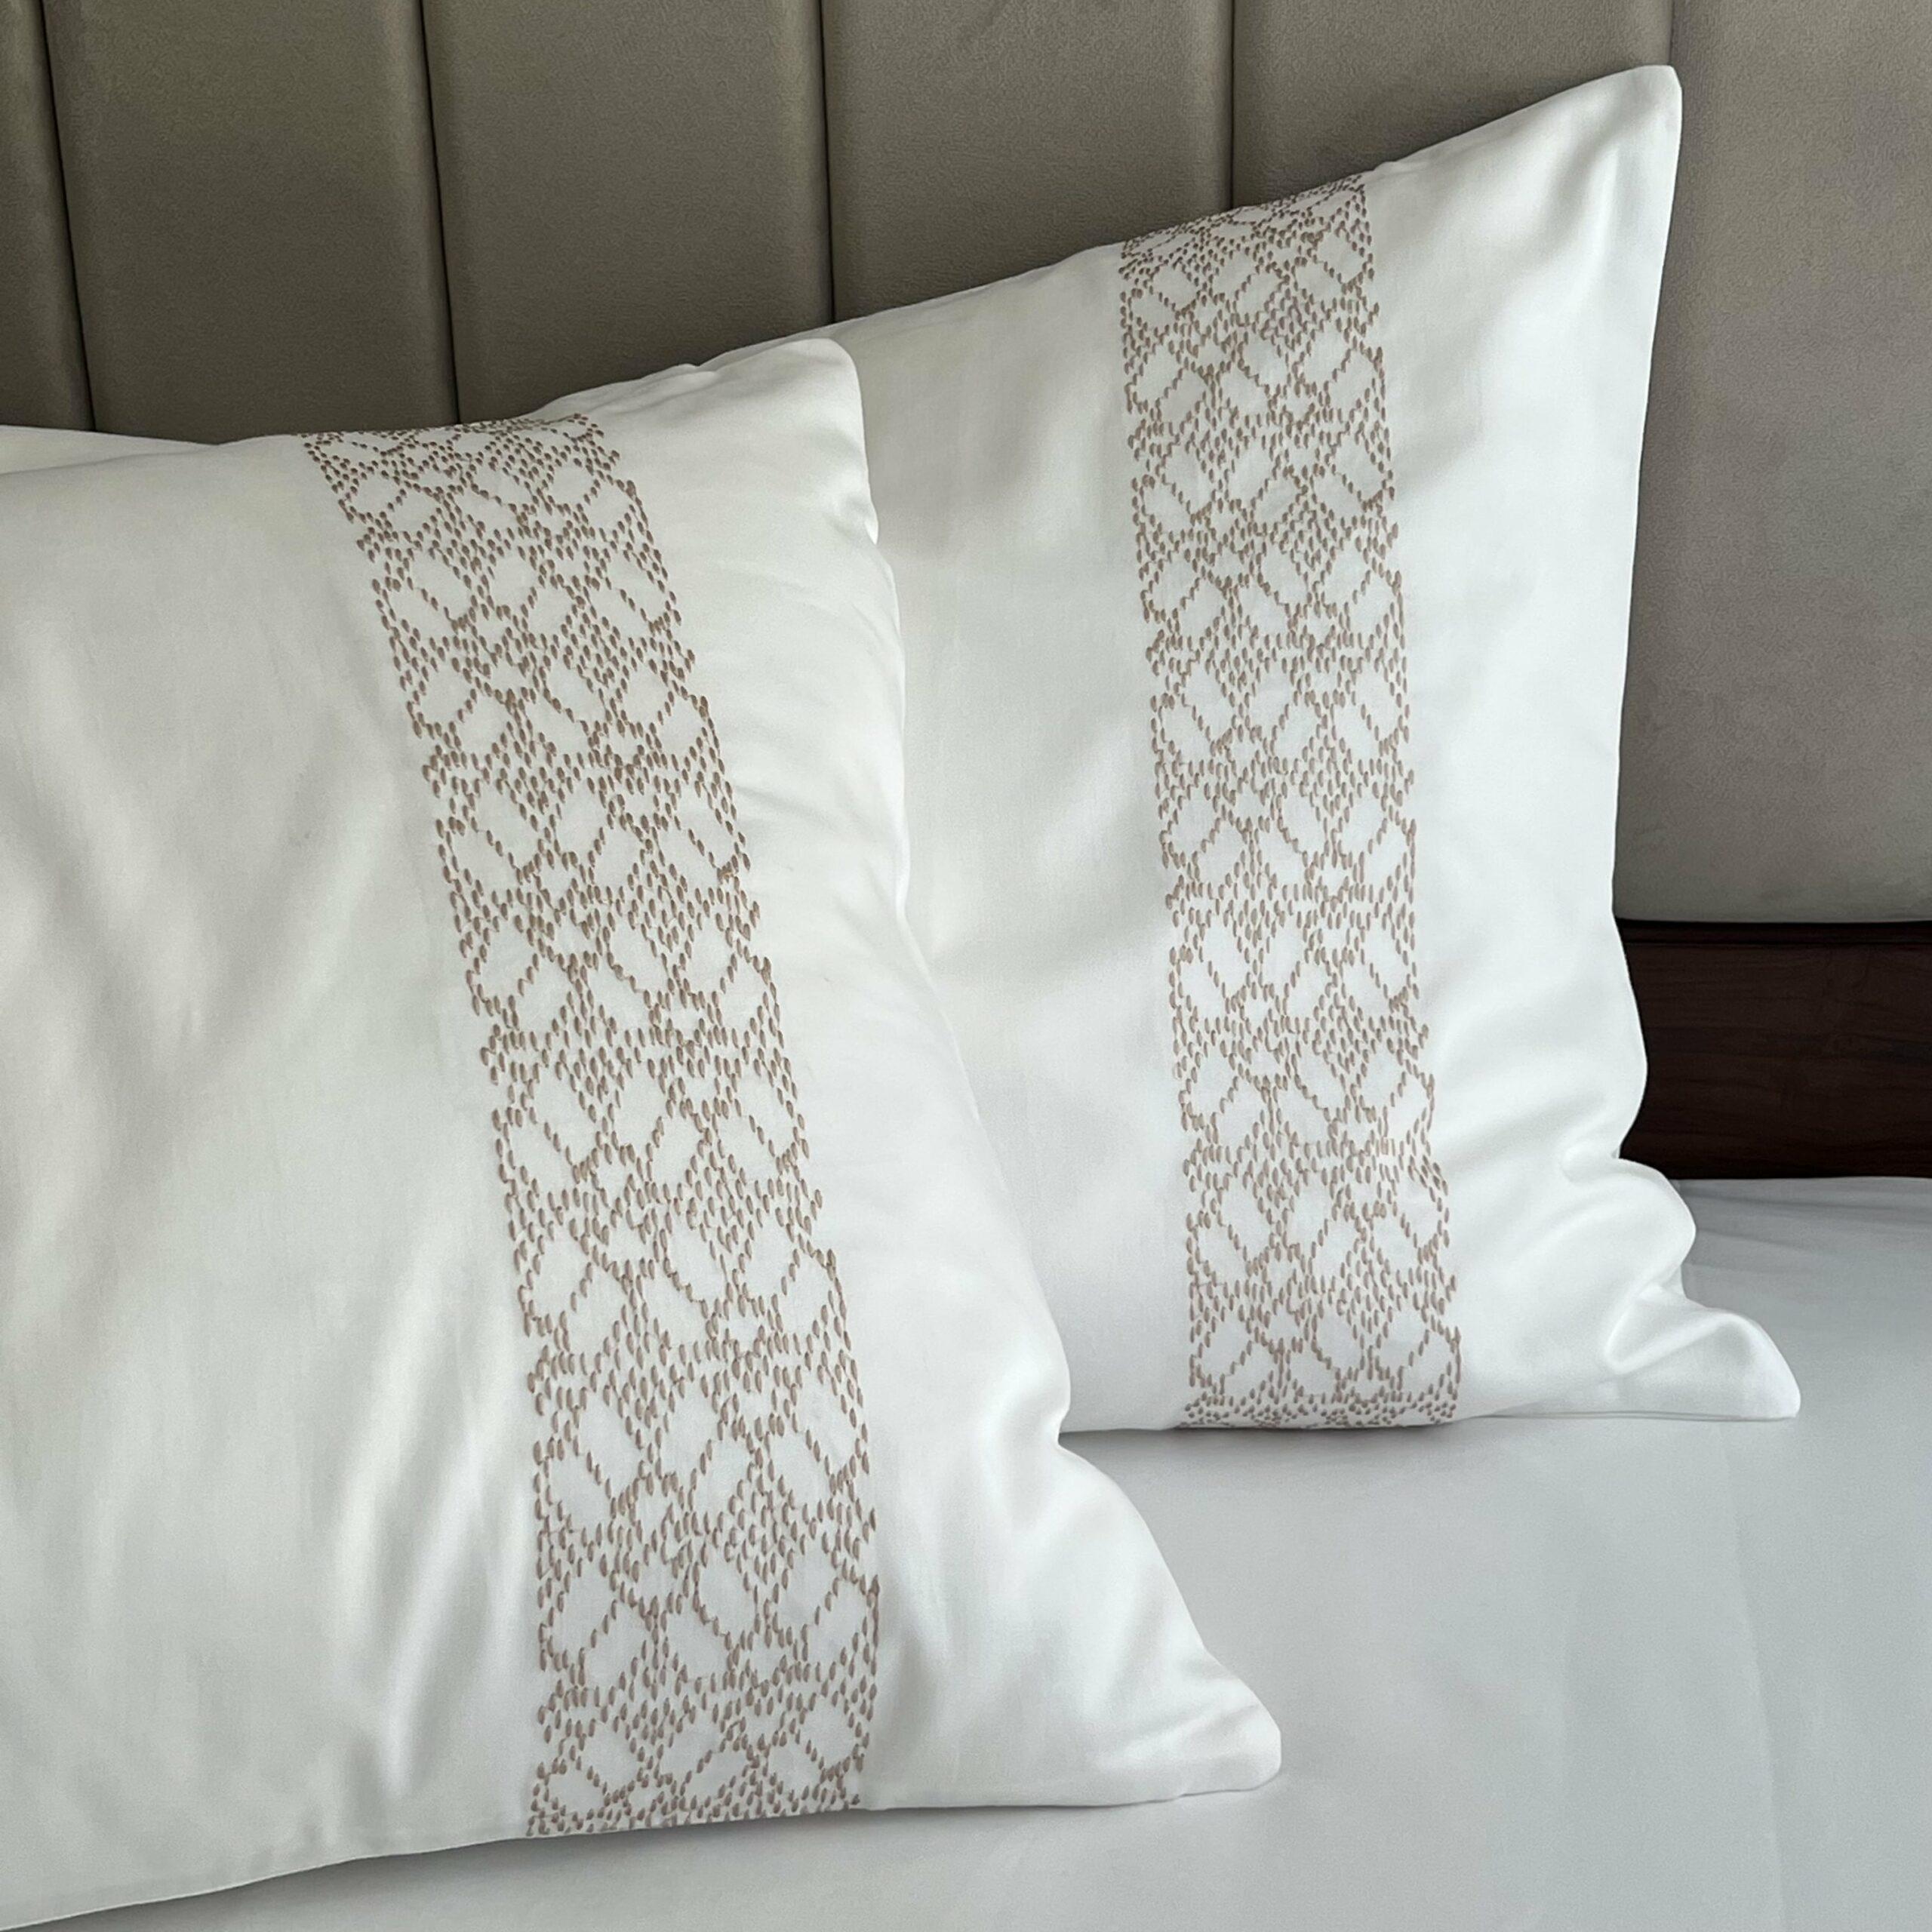 Trinket White Pillow Covers (Set of 2)